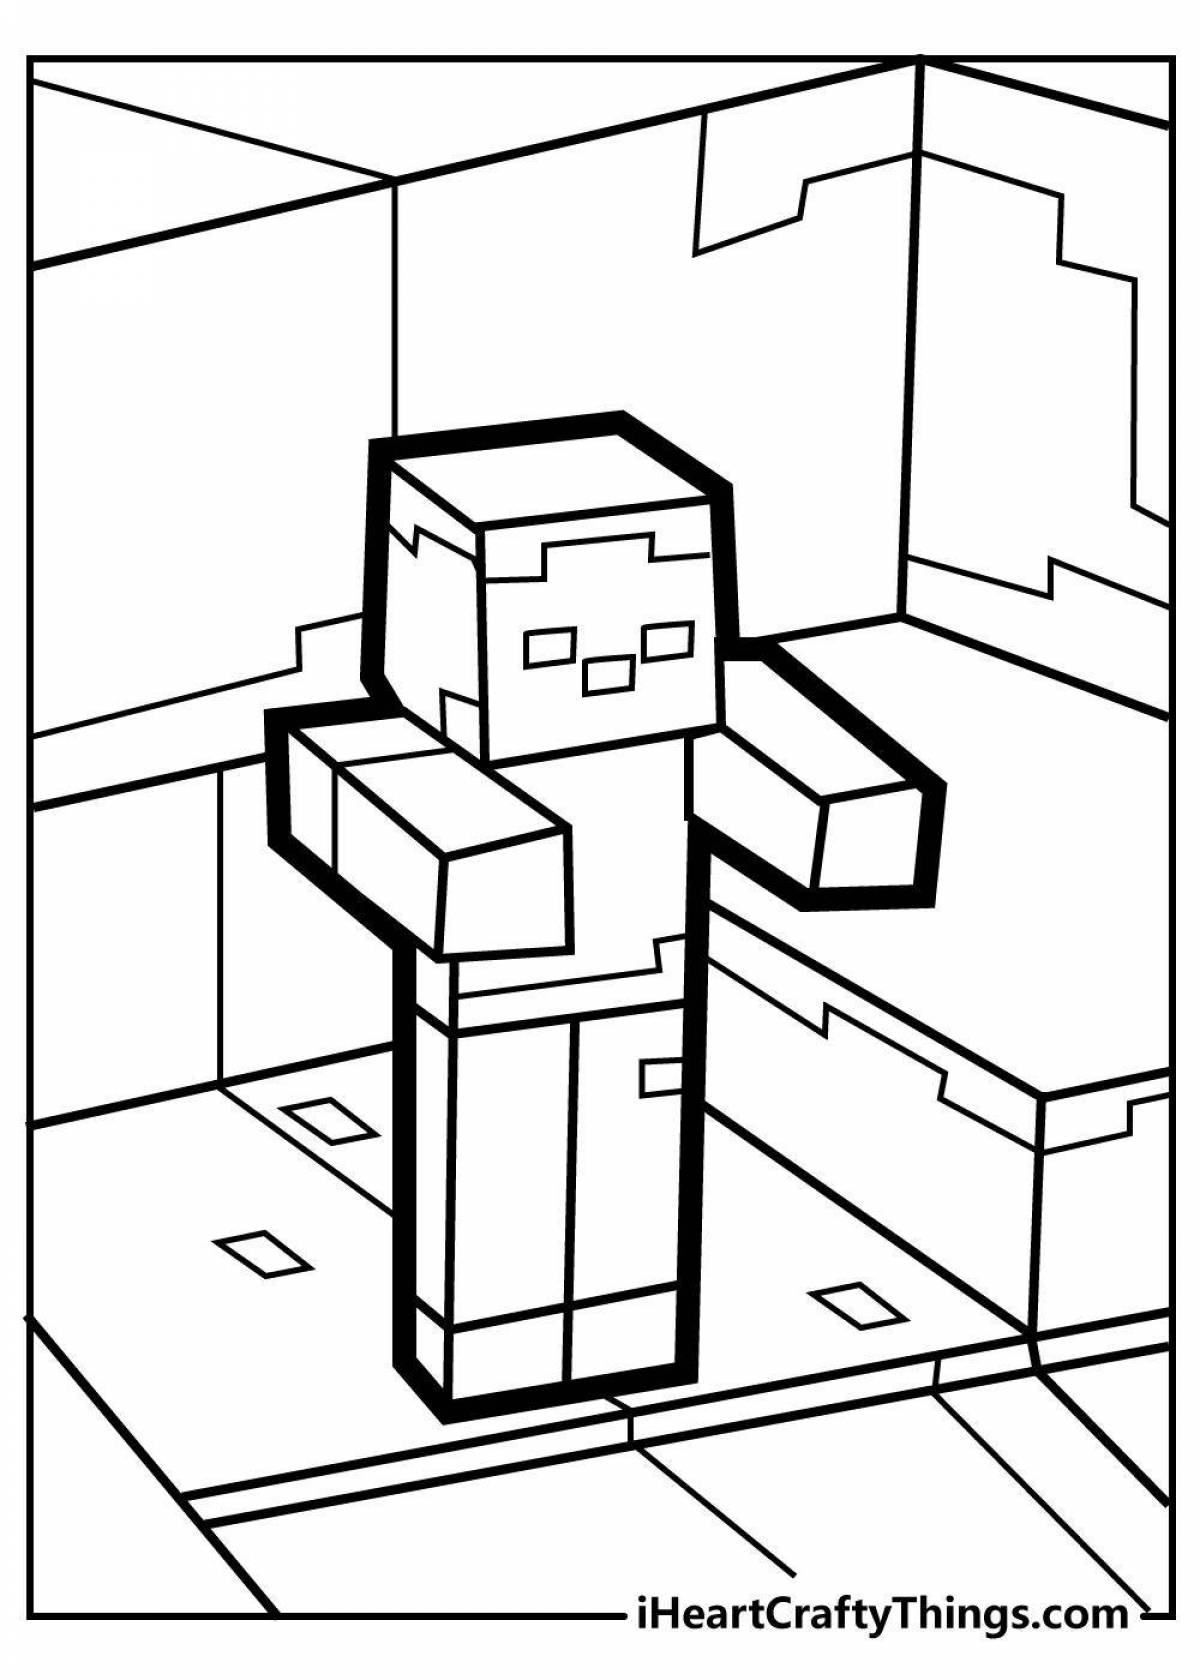 Exciting minecraft panda coloring page